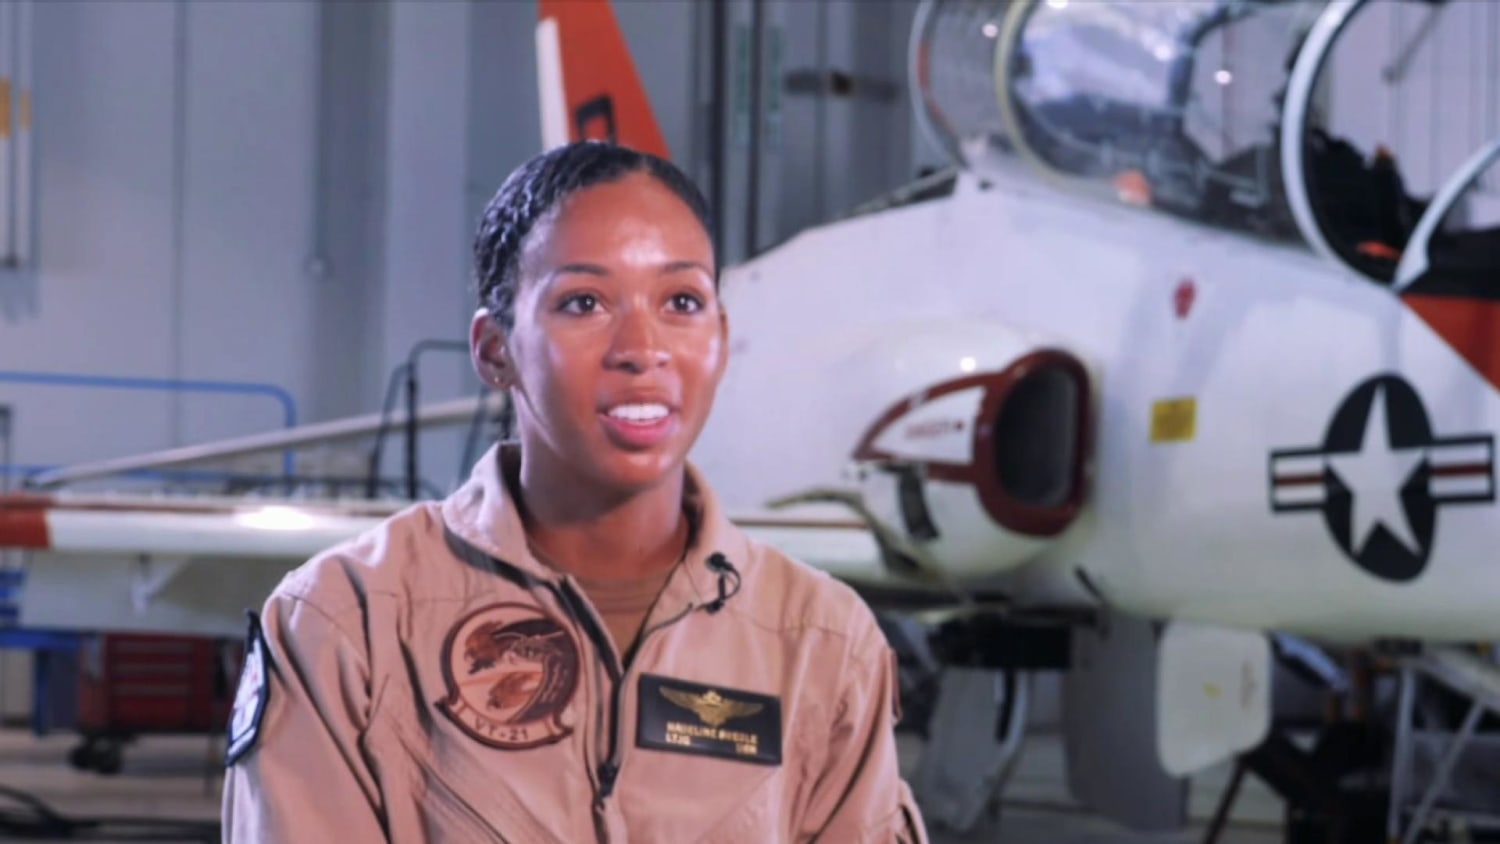 A historic milestone: U.S. Navy's first Black female tactical air pilot  earns 'Wings of Gold